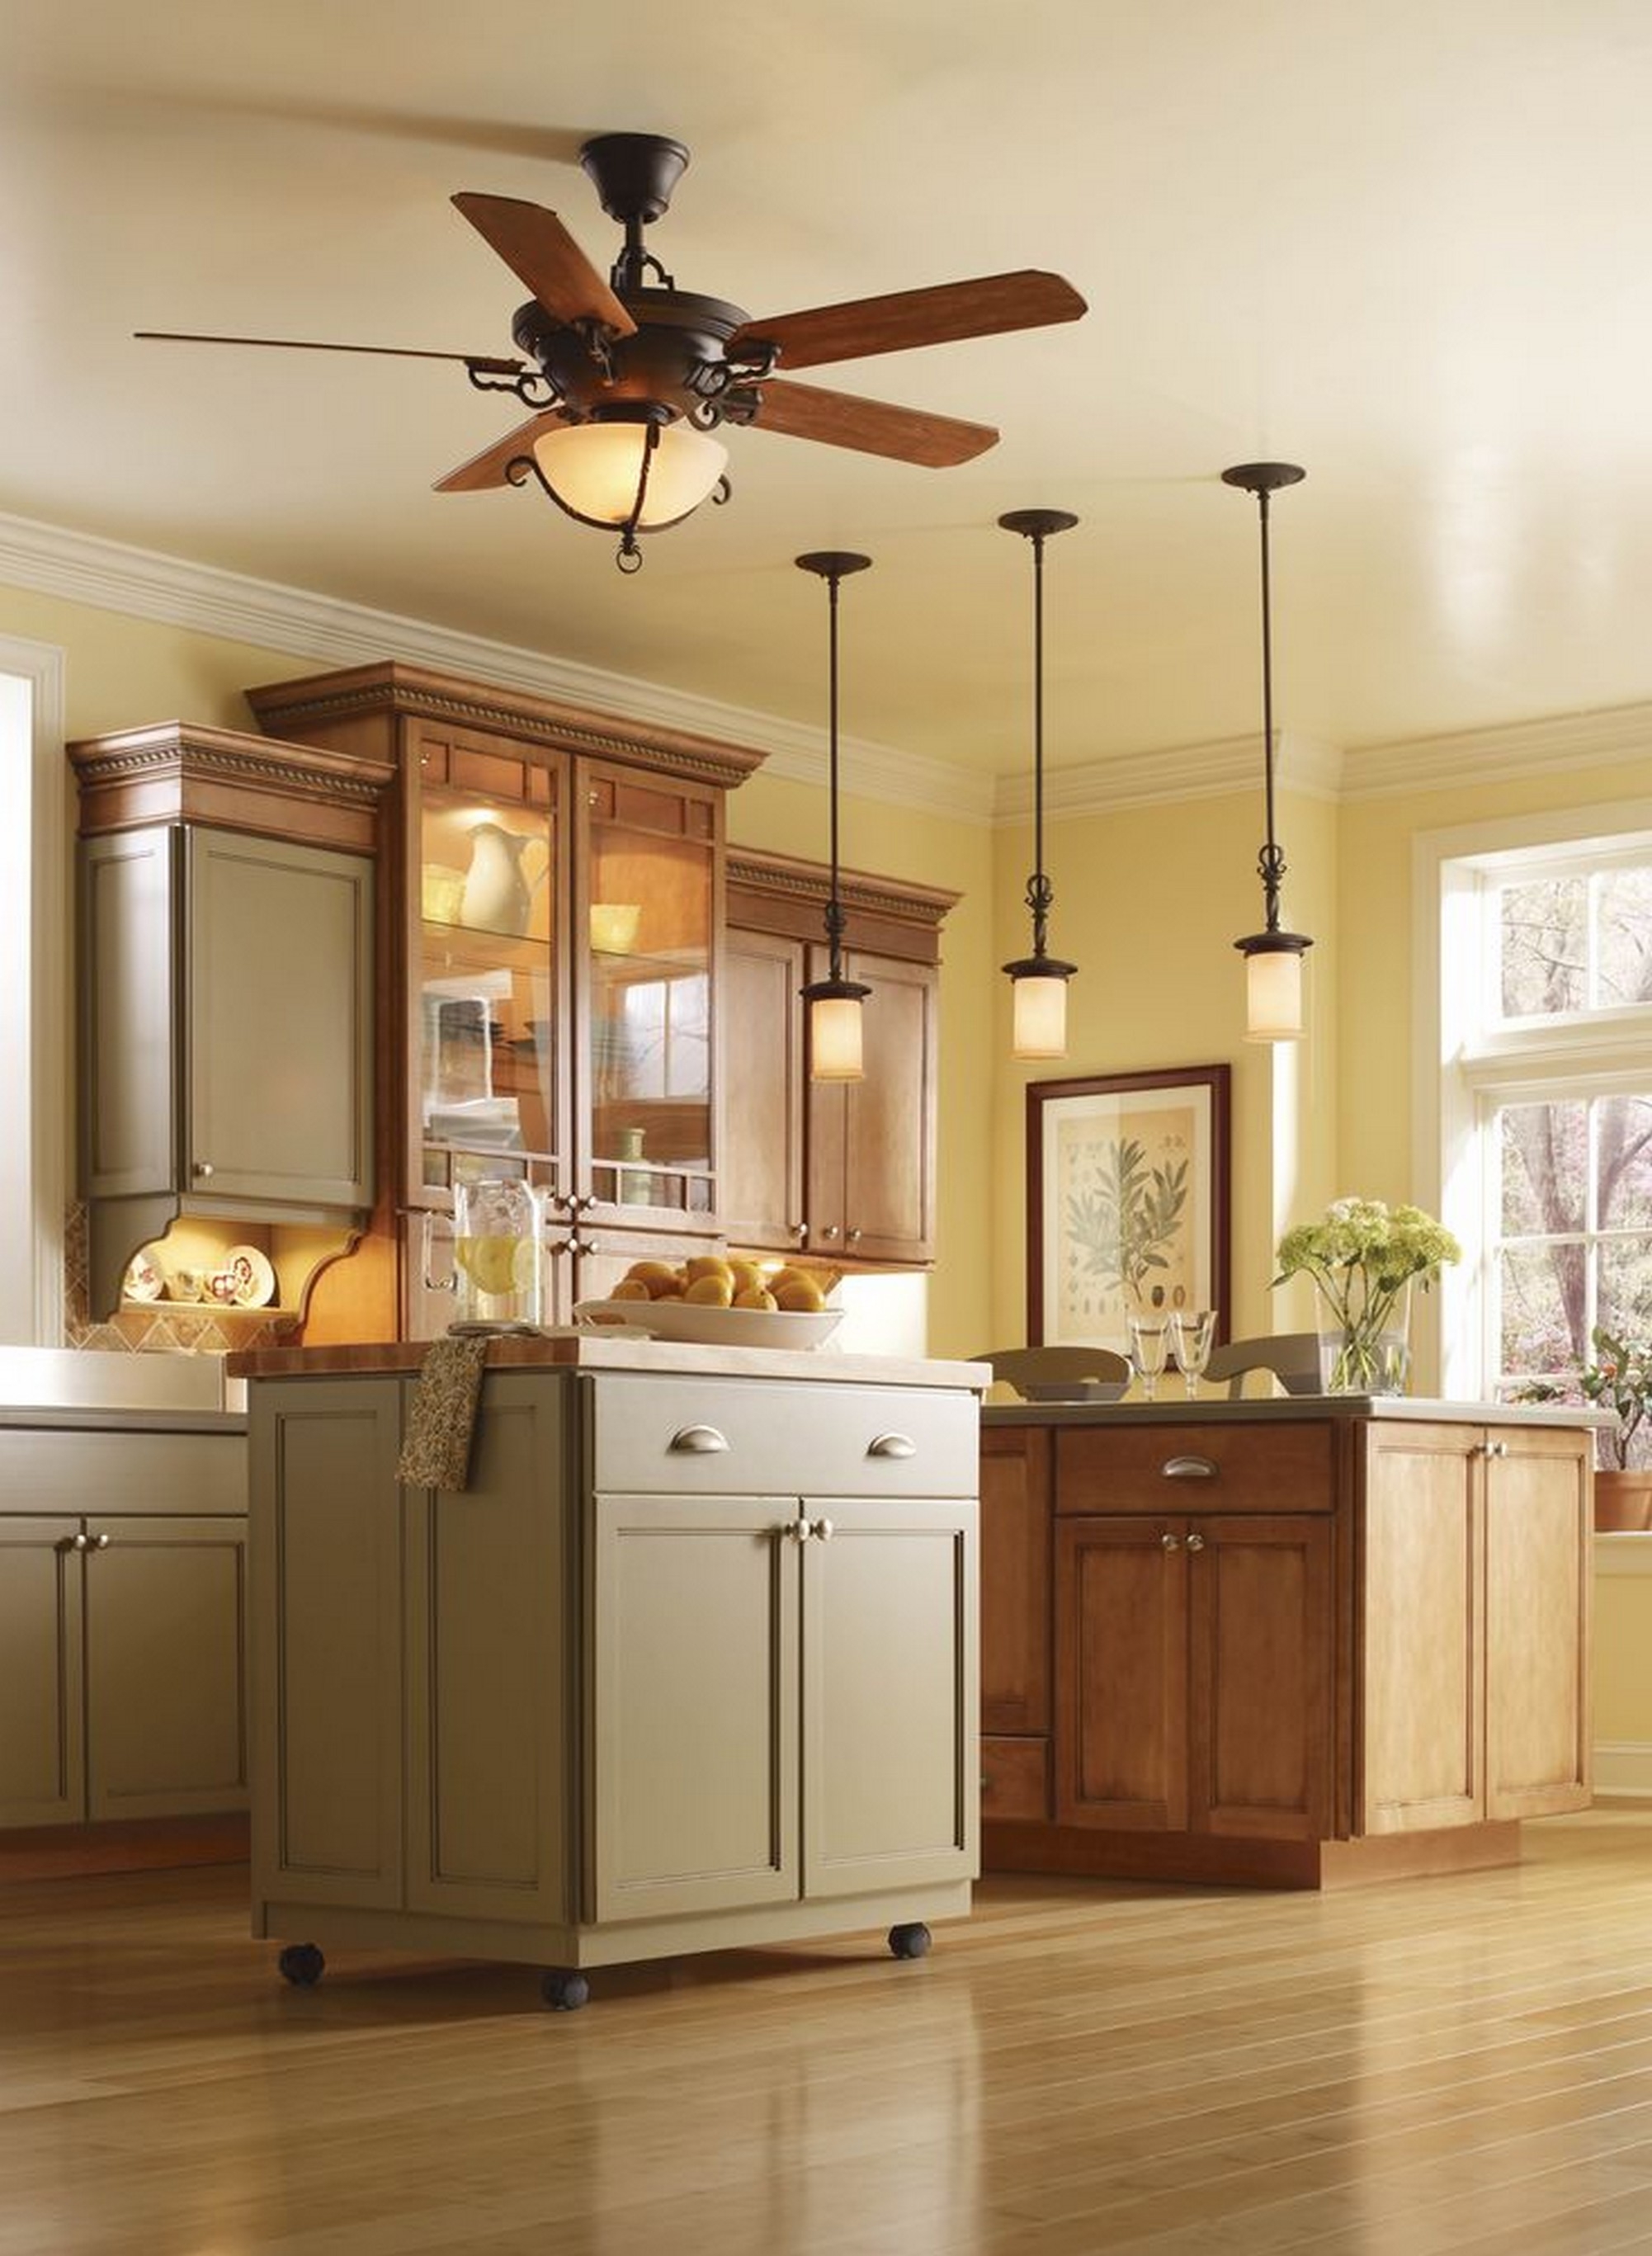 Ceiling Fans With Lights Kitchen2002 X 2734